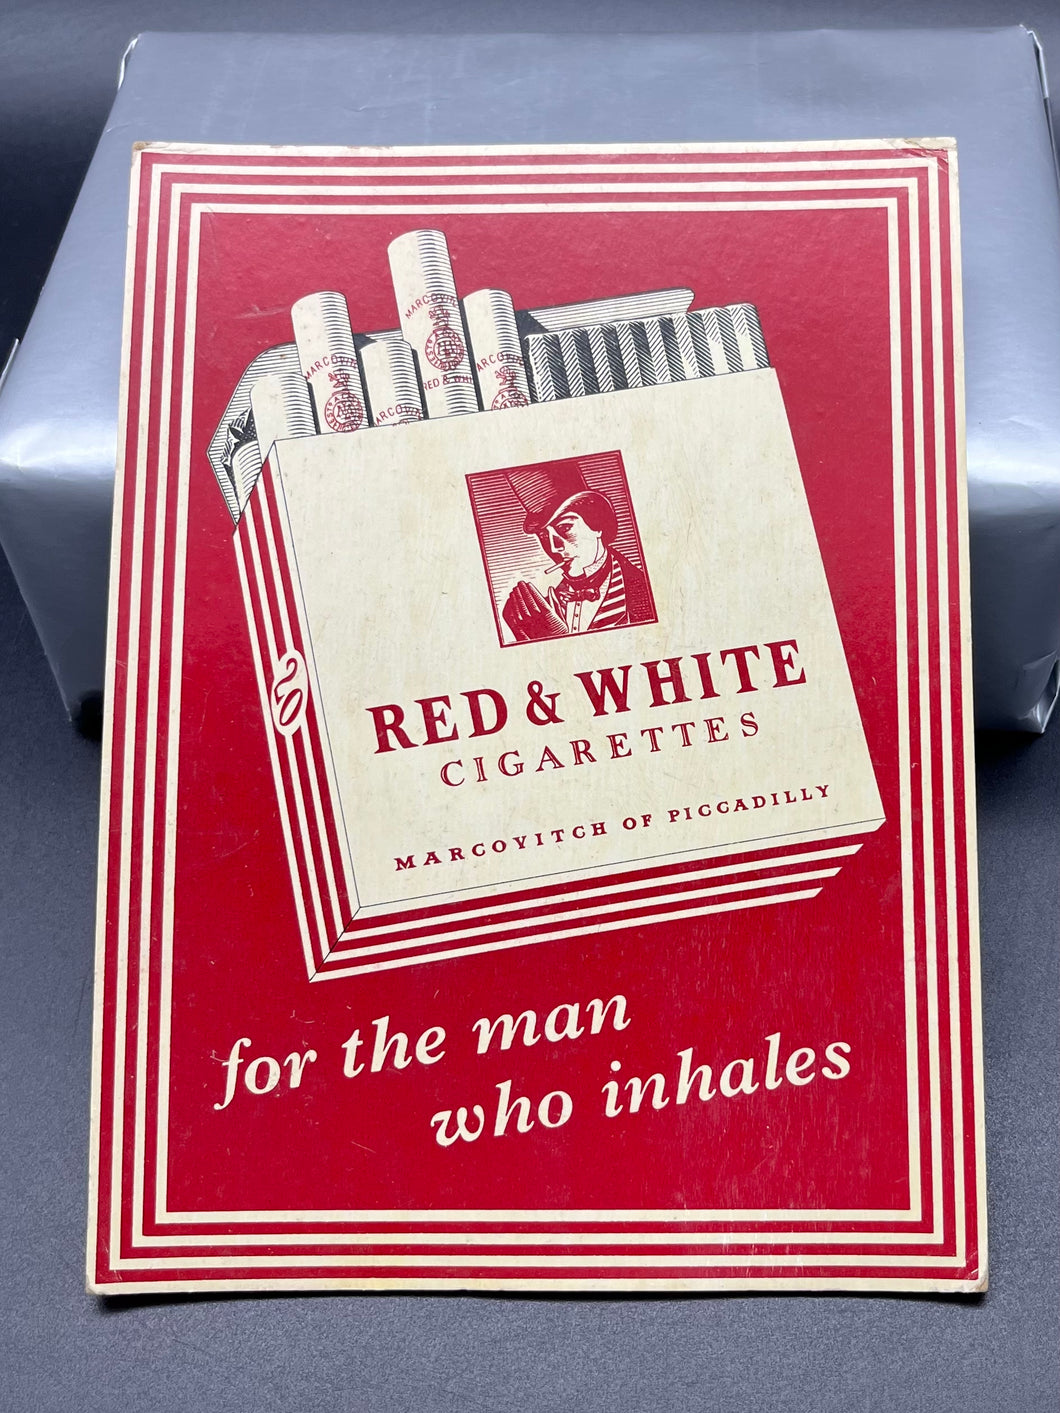 Red & White Cigarettes Cardboard Counter Display Advertisement